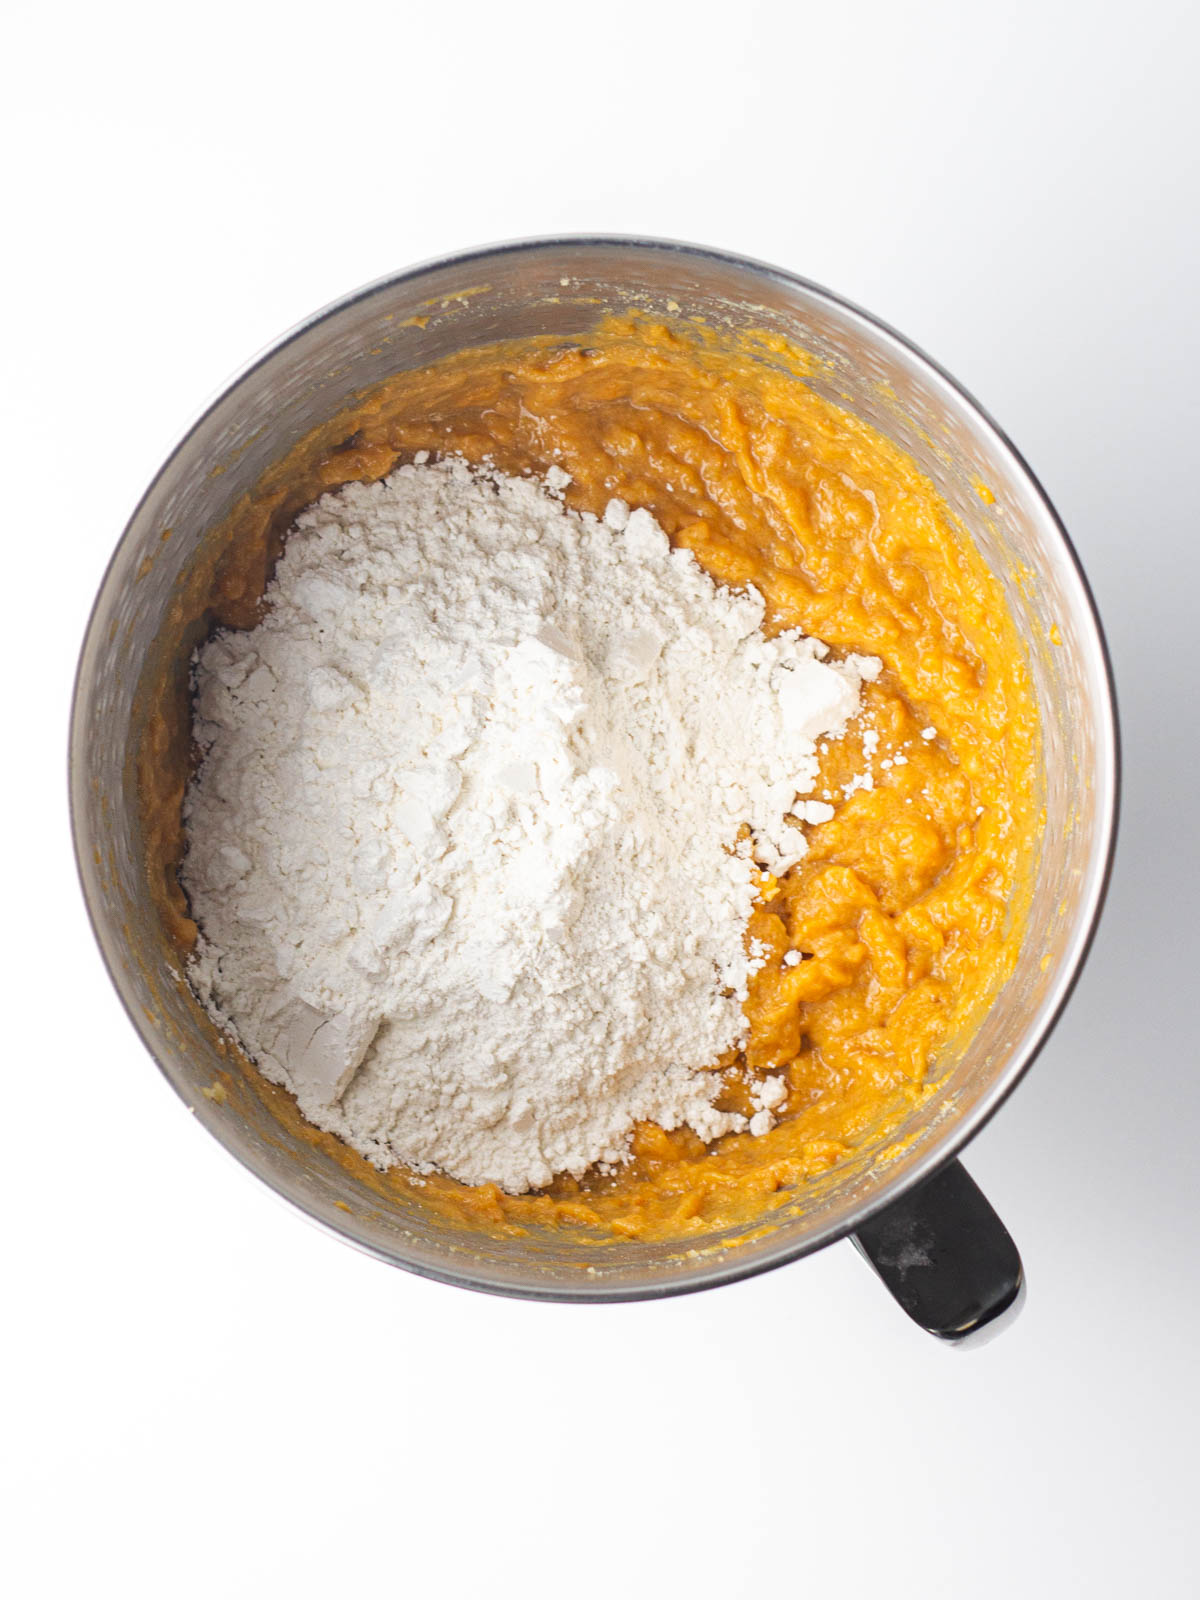 Flour and dry ingredients added to the sweet potato cake batter.